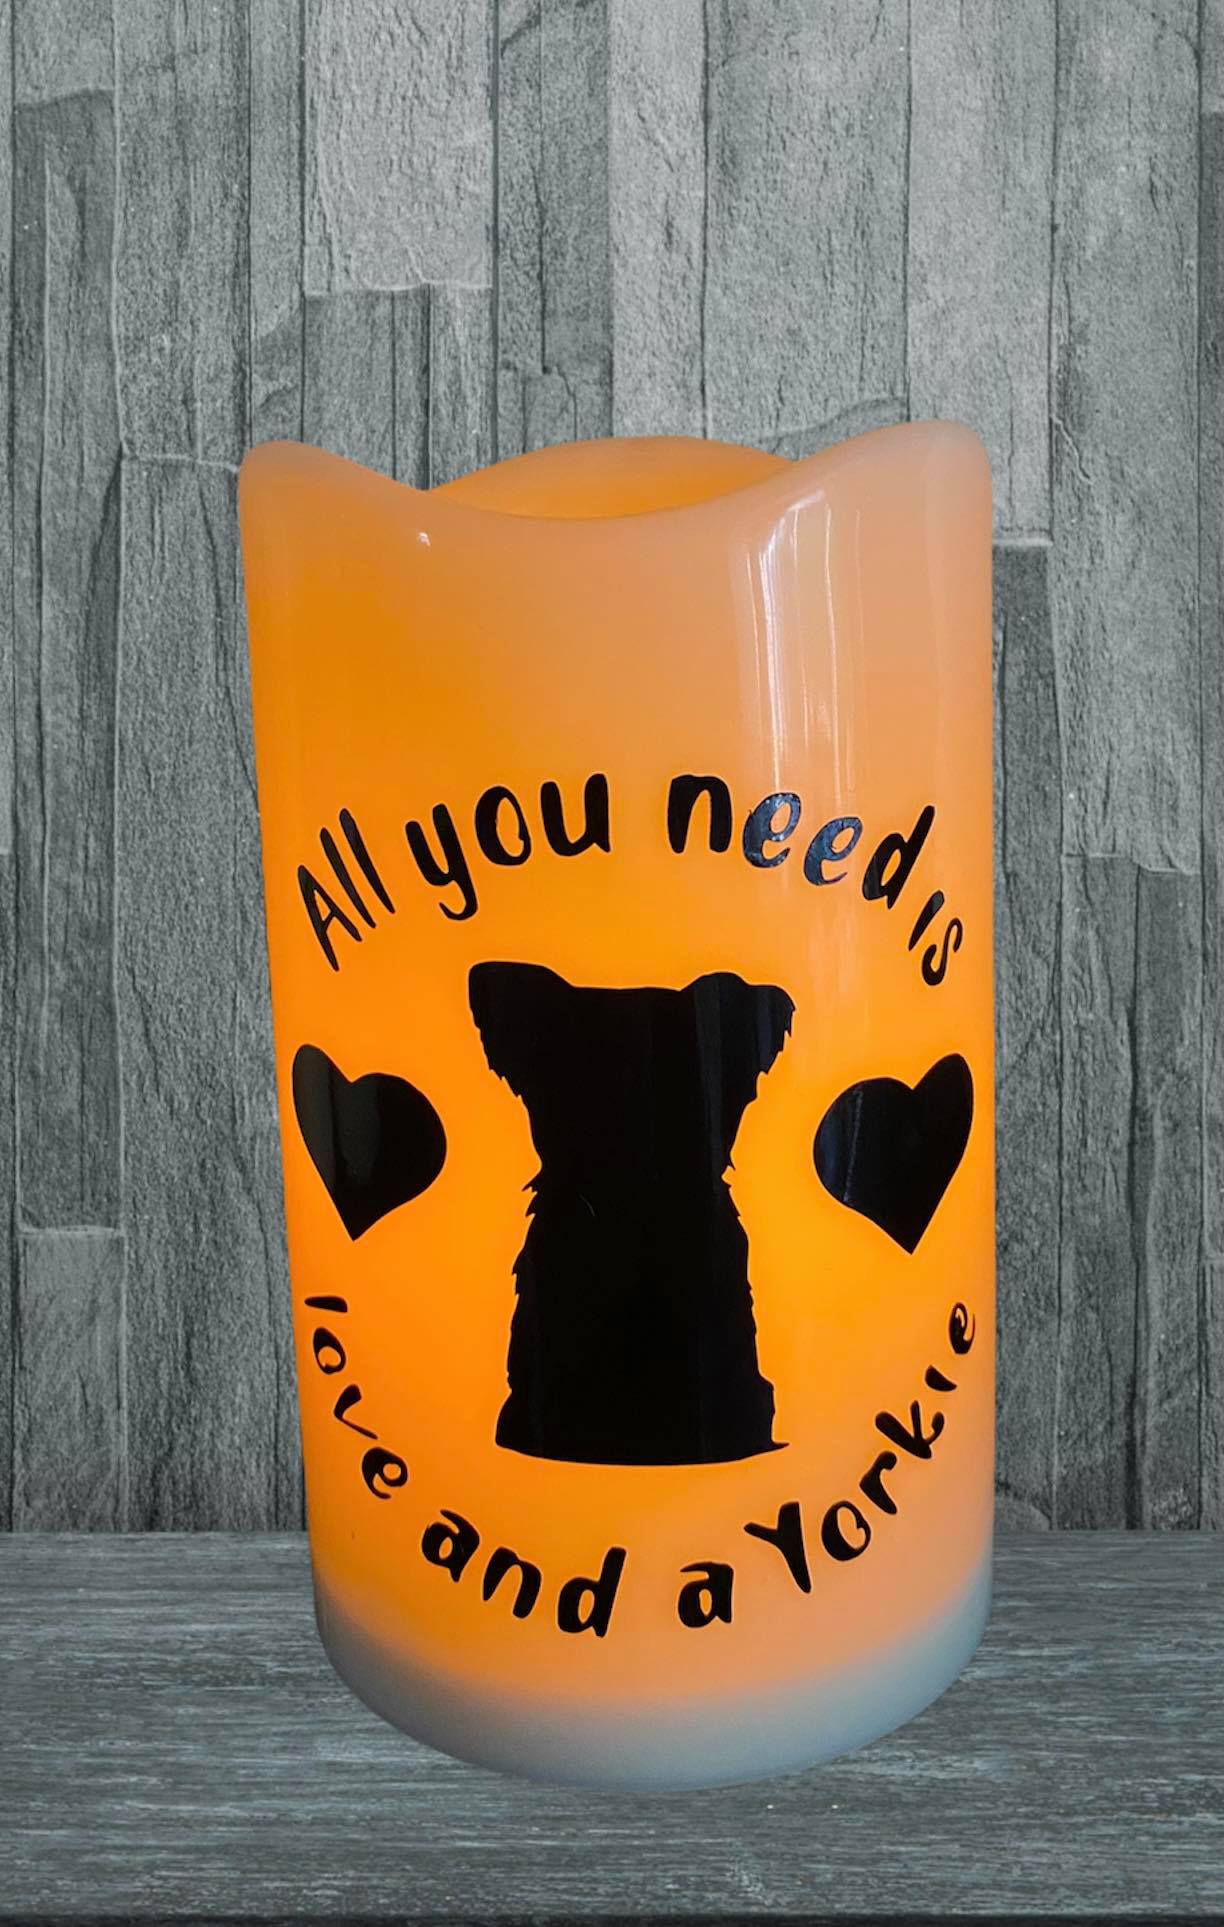 "All you need is love and a Yorkie" LED Candle